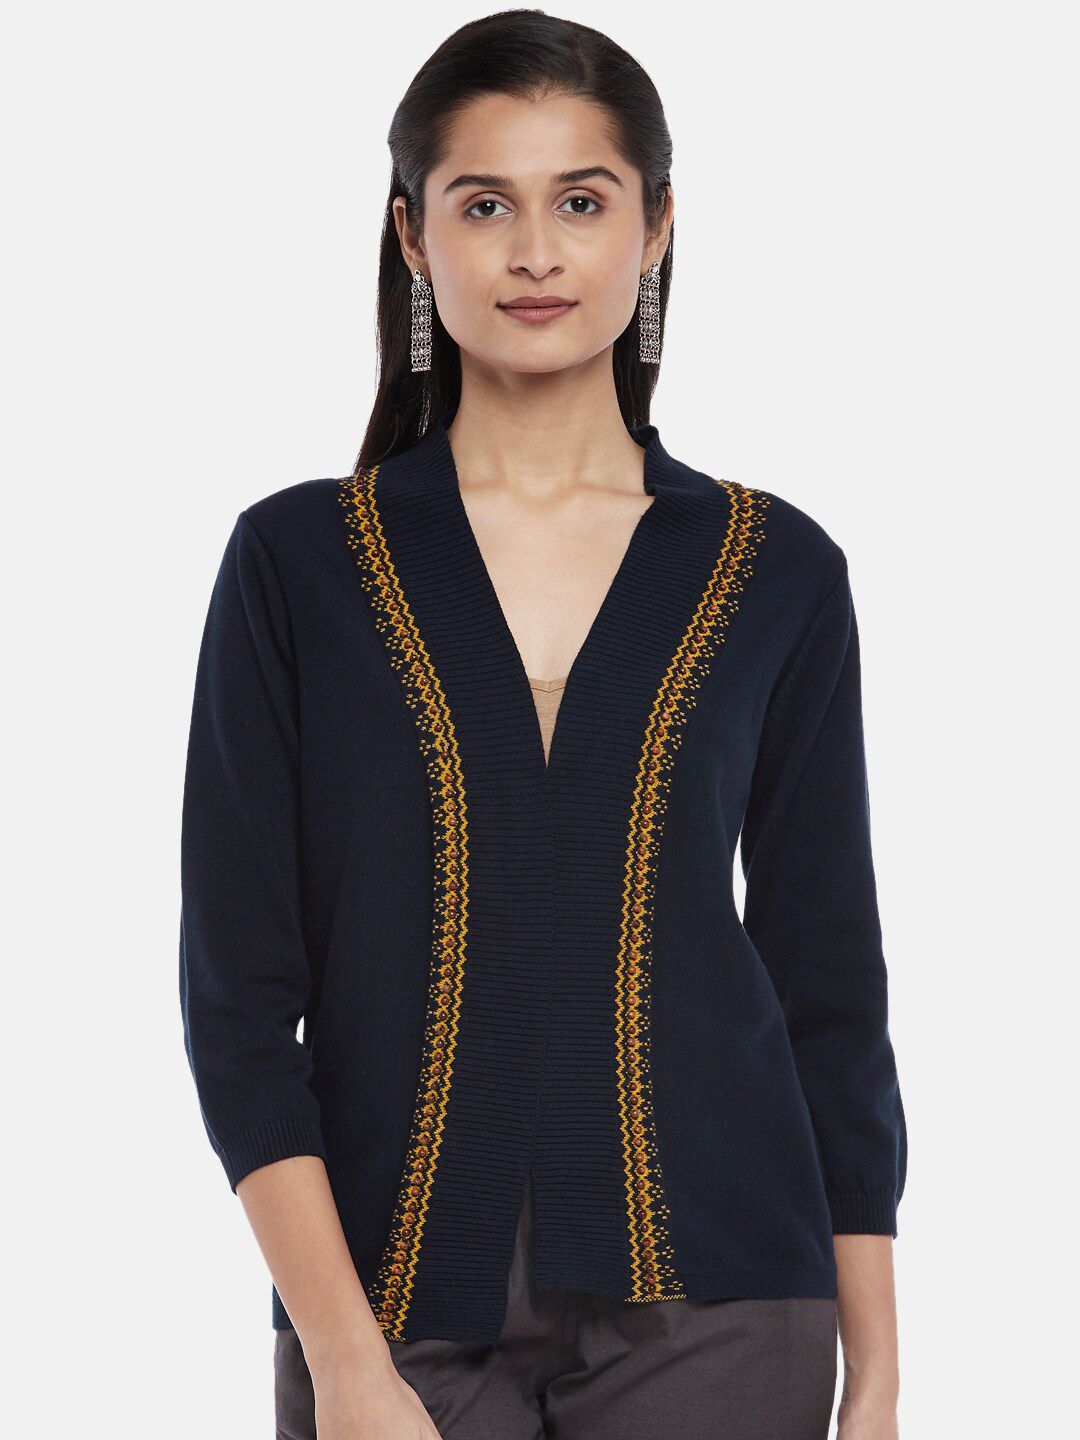 AKKRITI BY PANTALOONS Women Navy Blue & Mustard Open Front Shrug Price in India